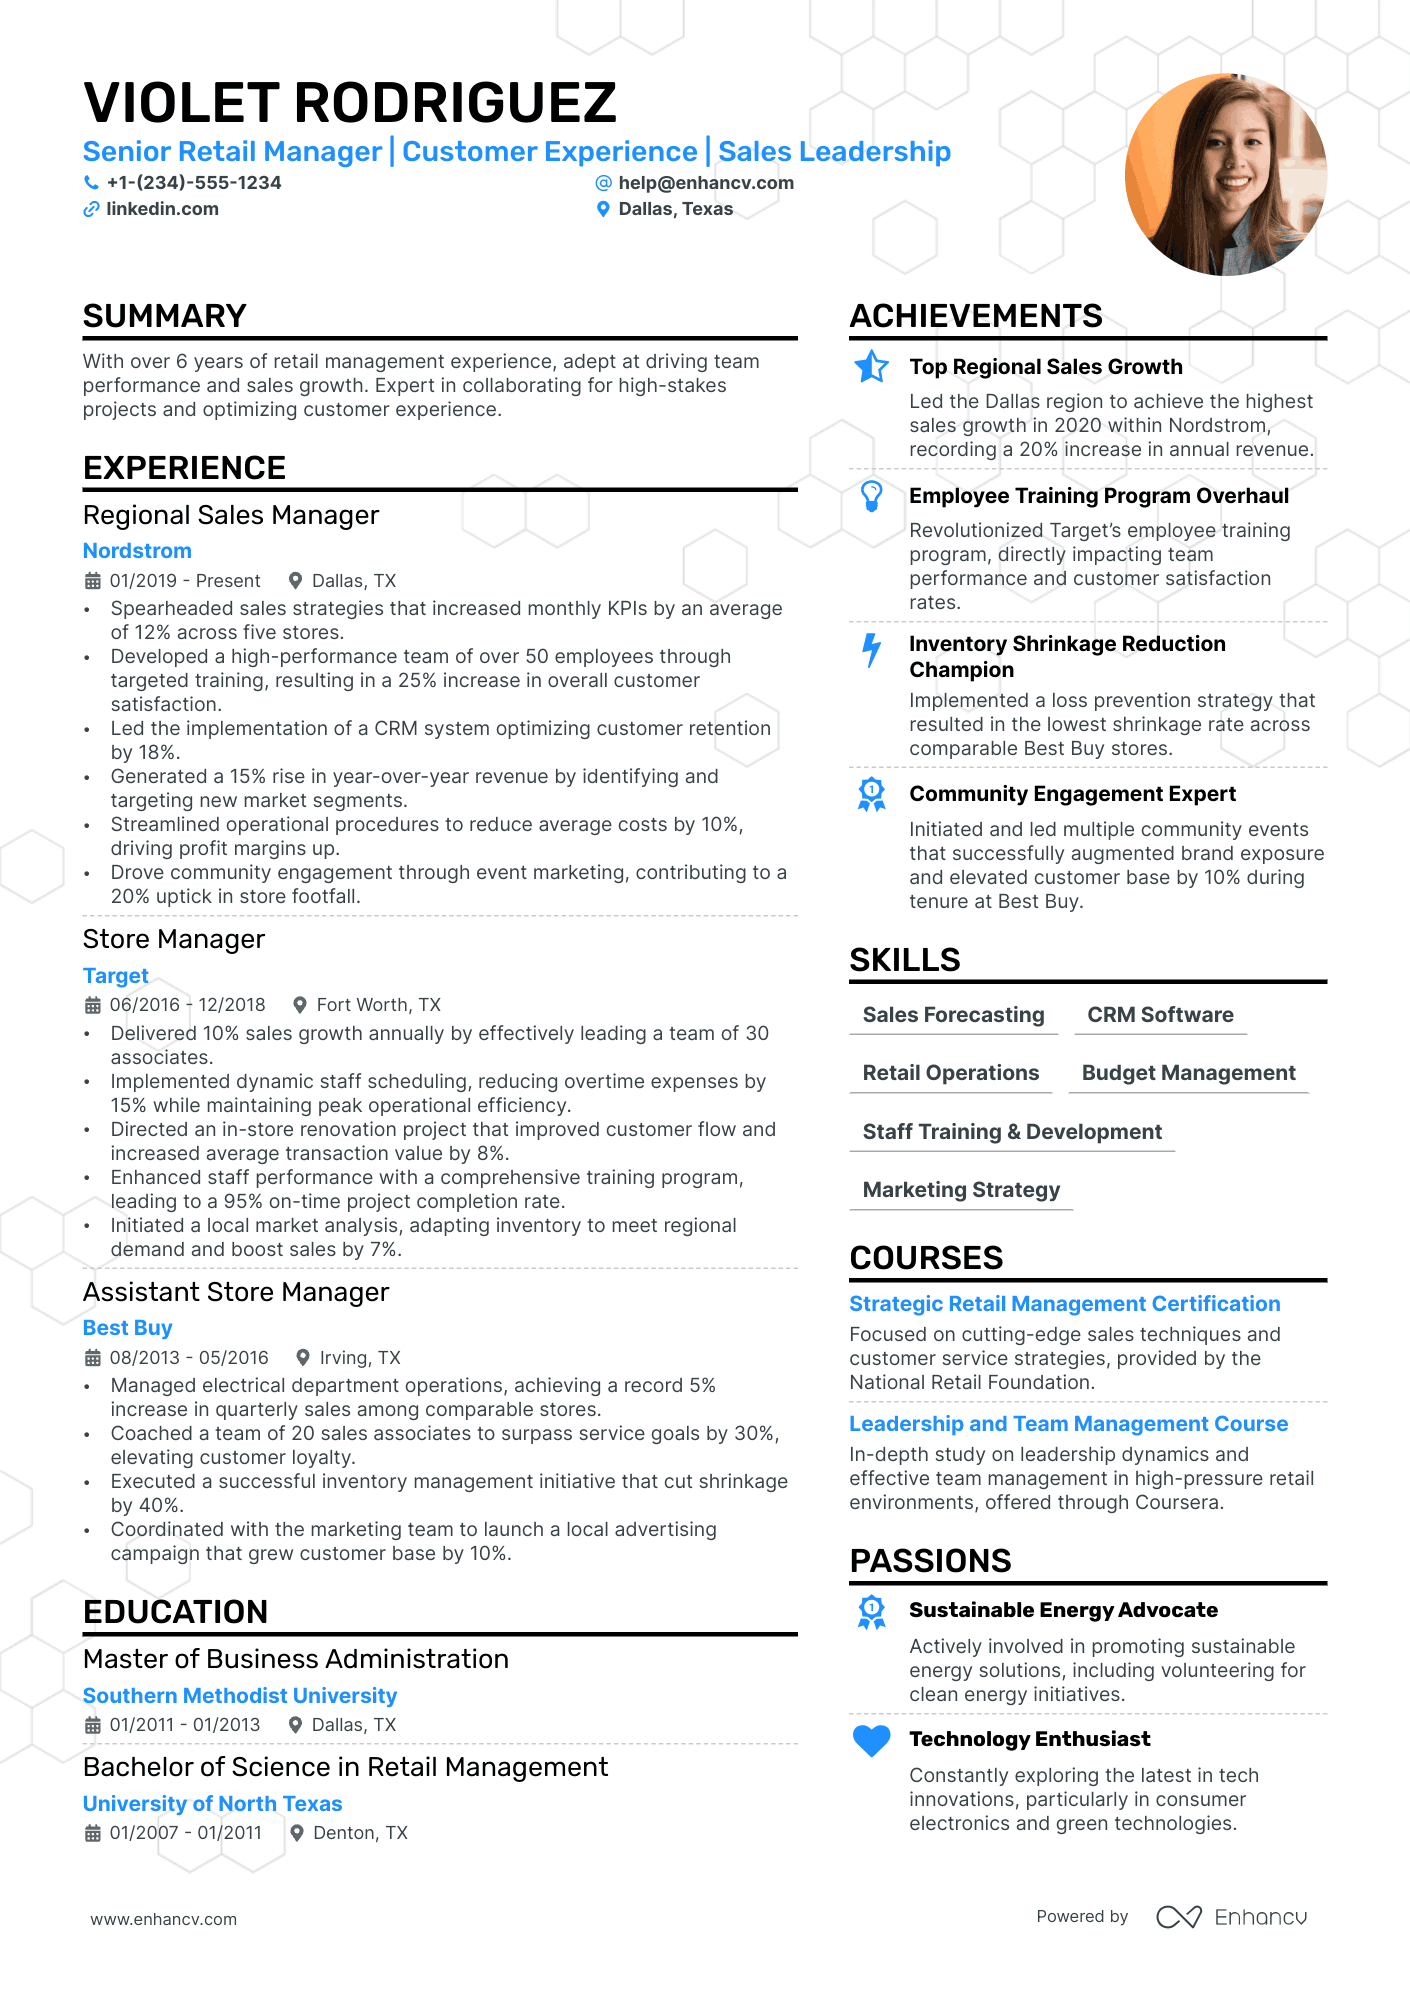 Customer Experience Manager resume example